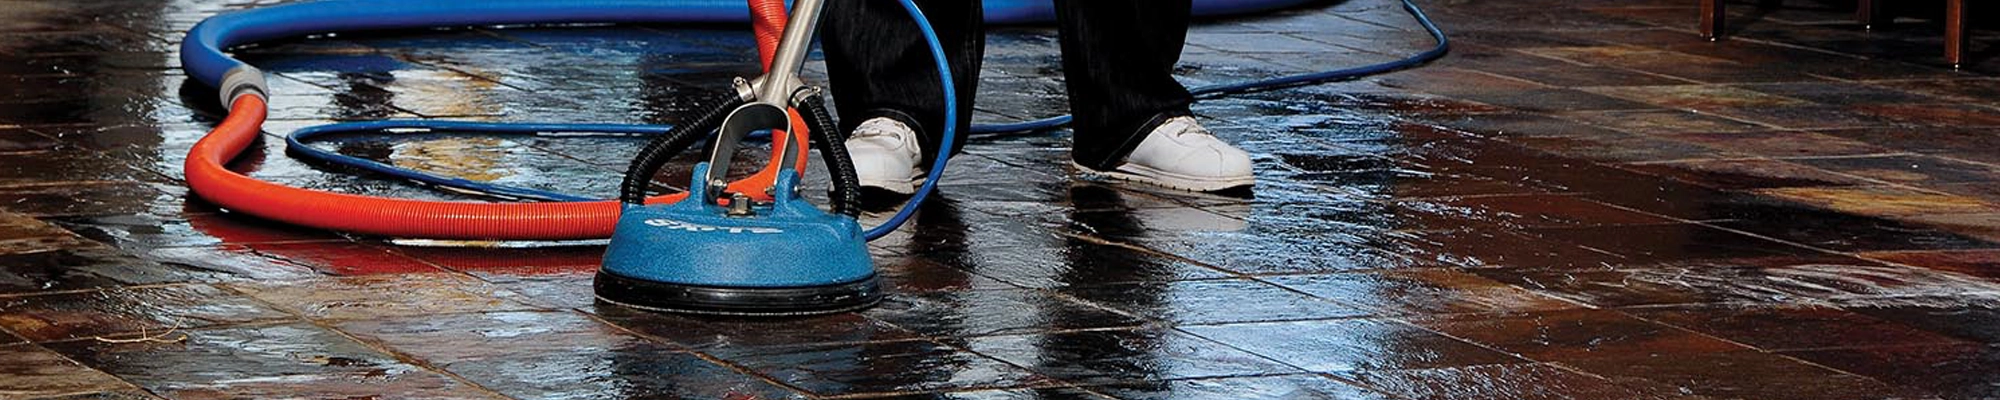 Cleaning and flooring maintenance services provided by Aumsbaugh Flooring CarpetsPlus Colortile in Columbia City, IN